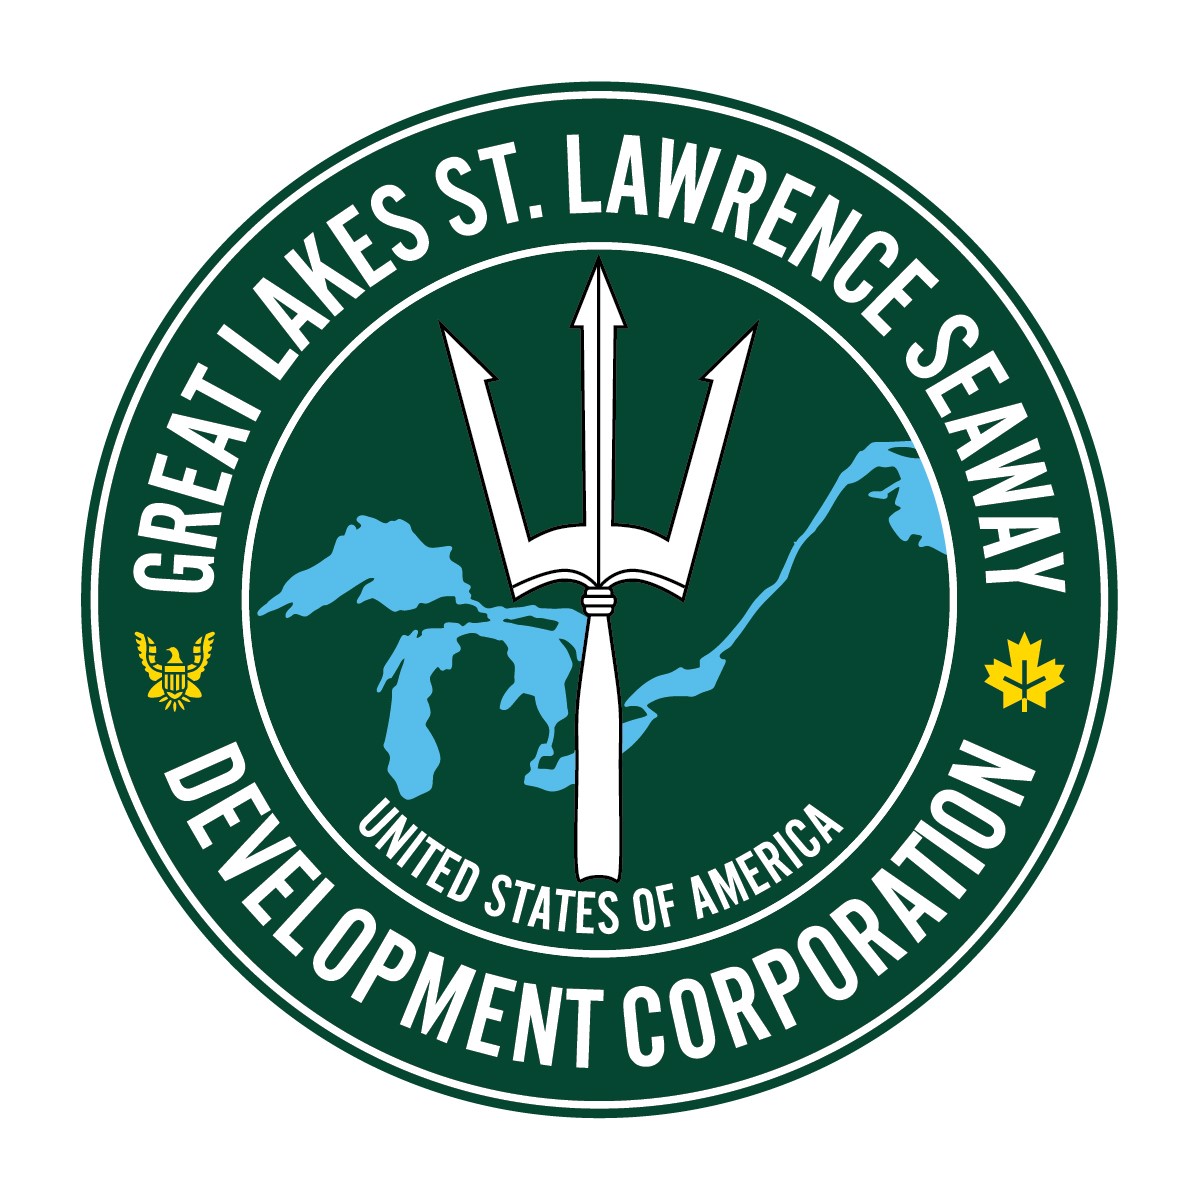 Great Lakes St. Lawrence Seaway Development Corporation (U.S.) and the St. Lawrence Seaway Management Corporation (SLSMC)